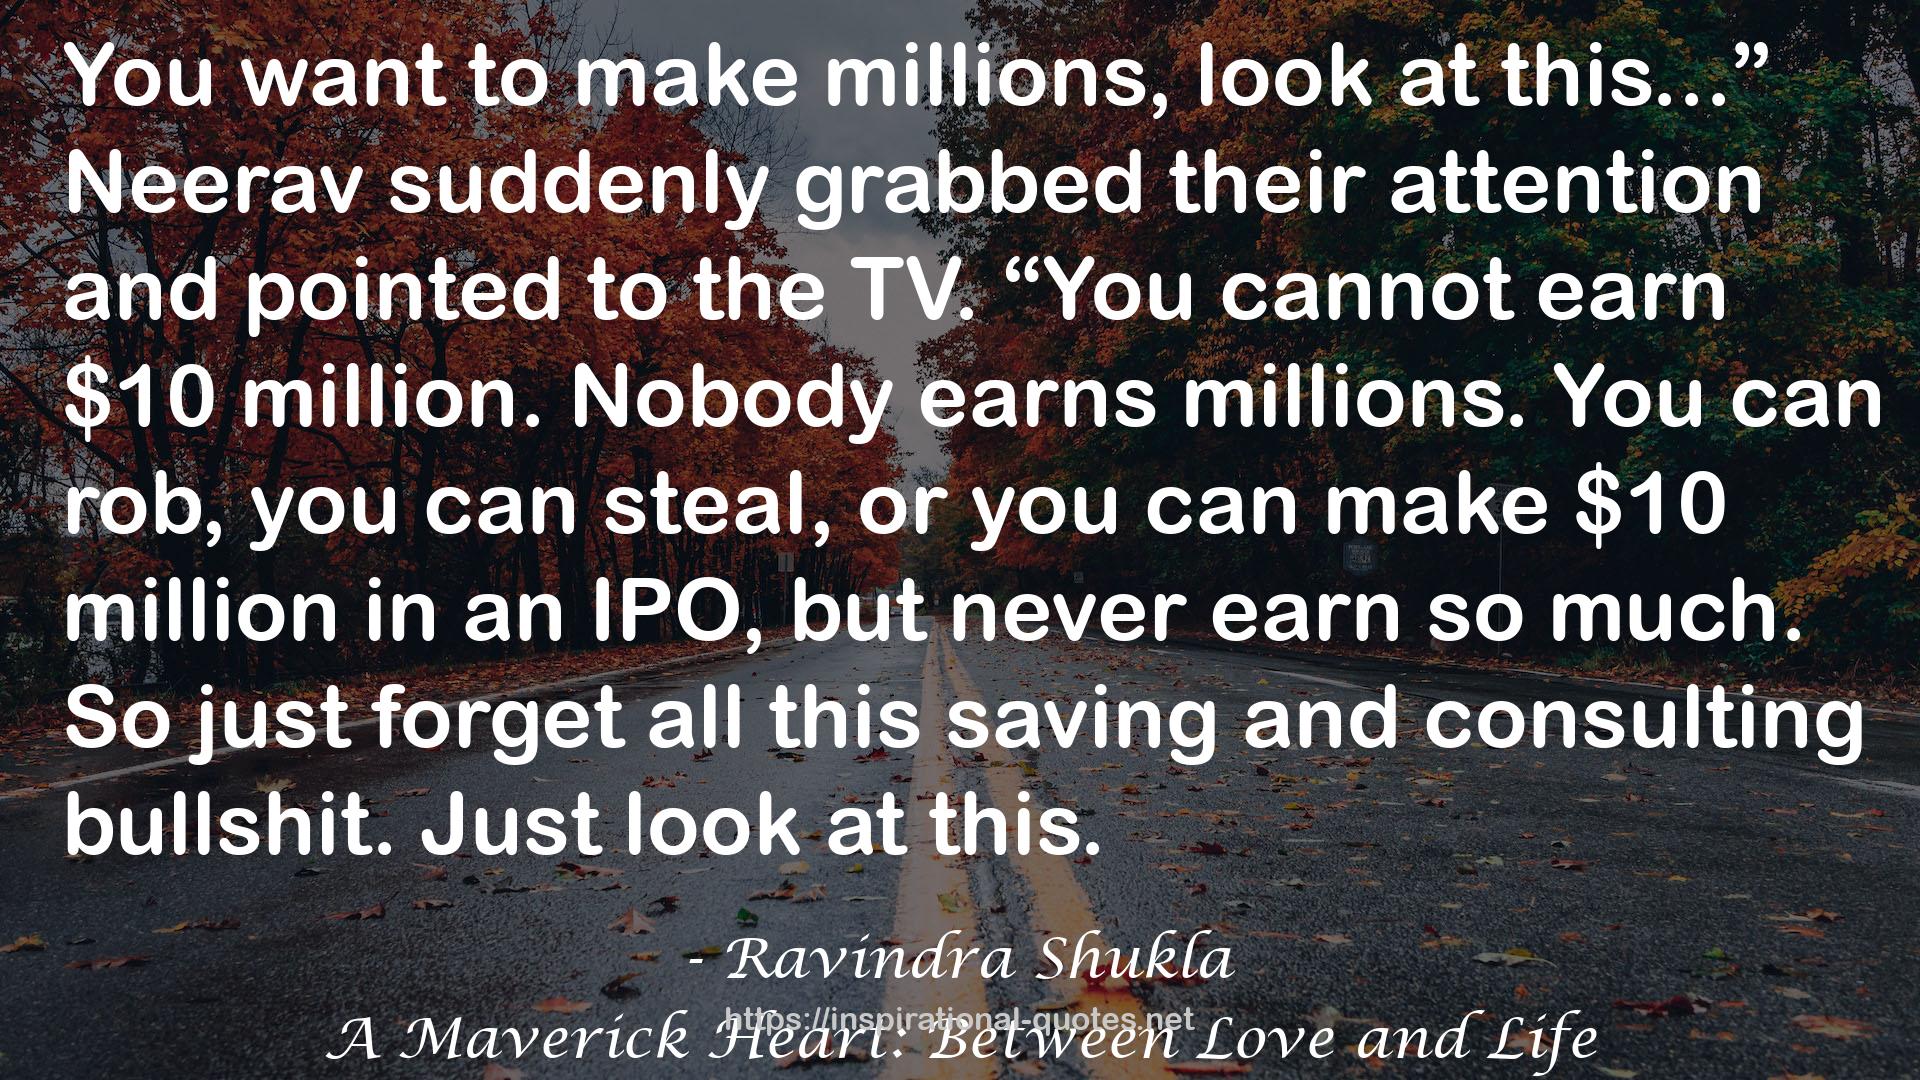 A Maverick Heart: Between Love and Life QUOTES